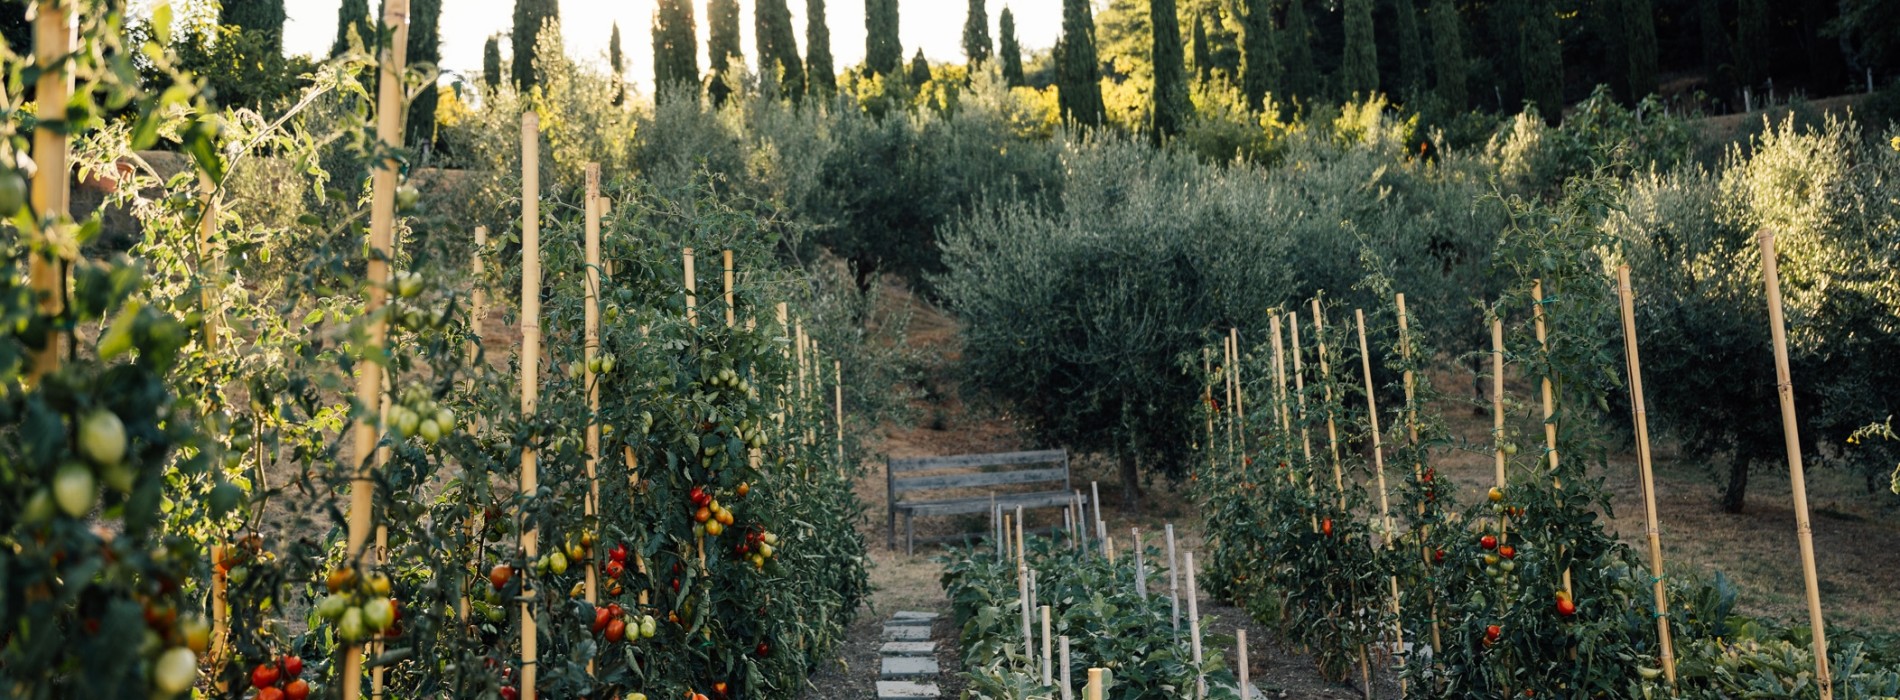 Learn Tuscan cooking true Italian style and have fun doing it!